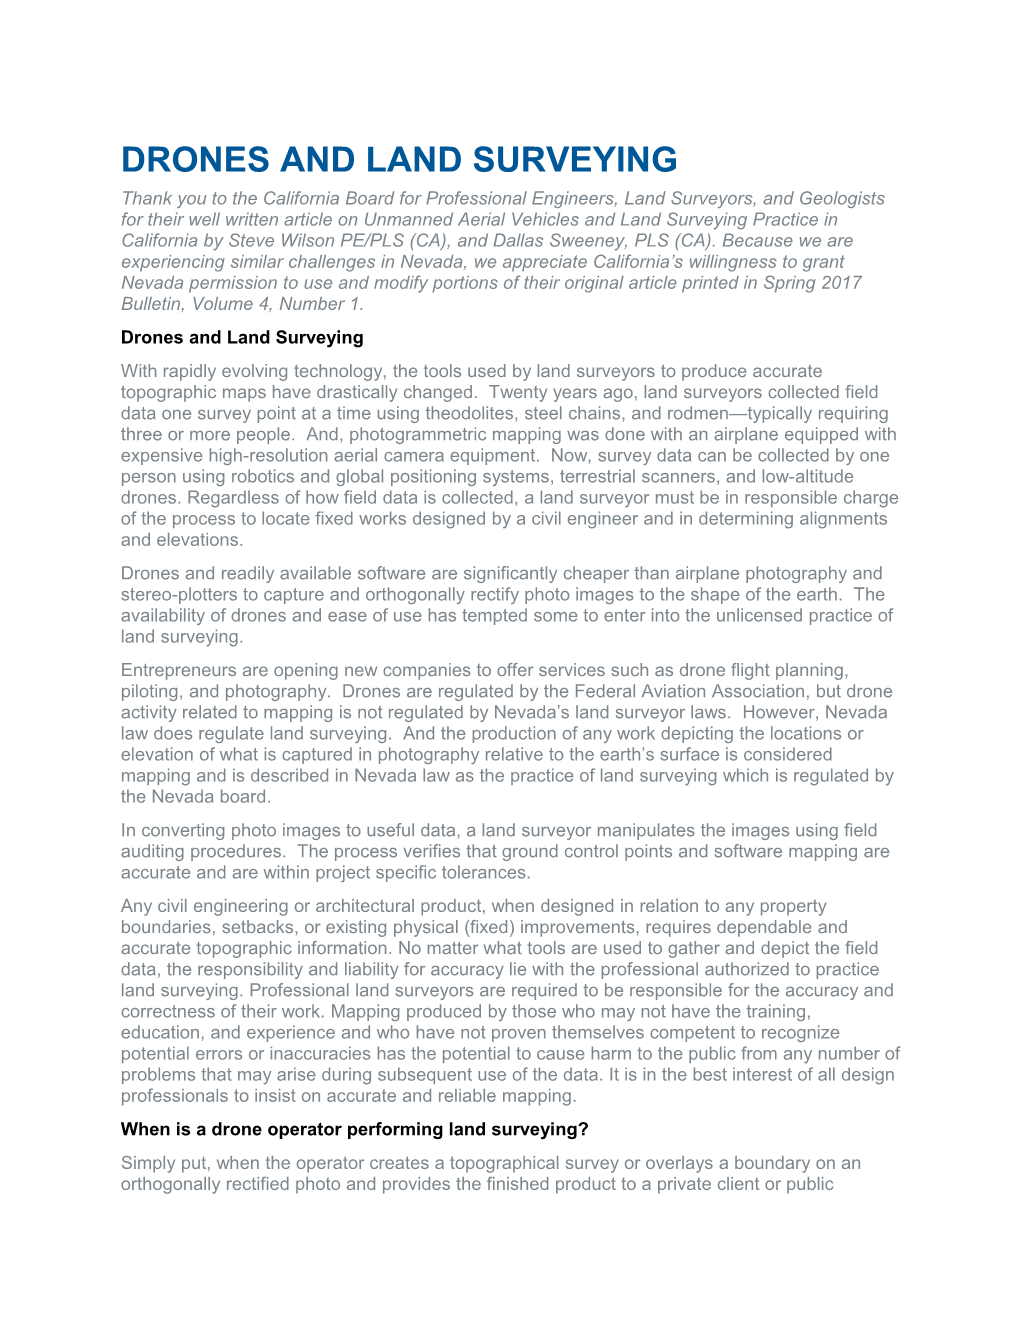 Drones and Land Surveying